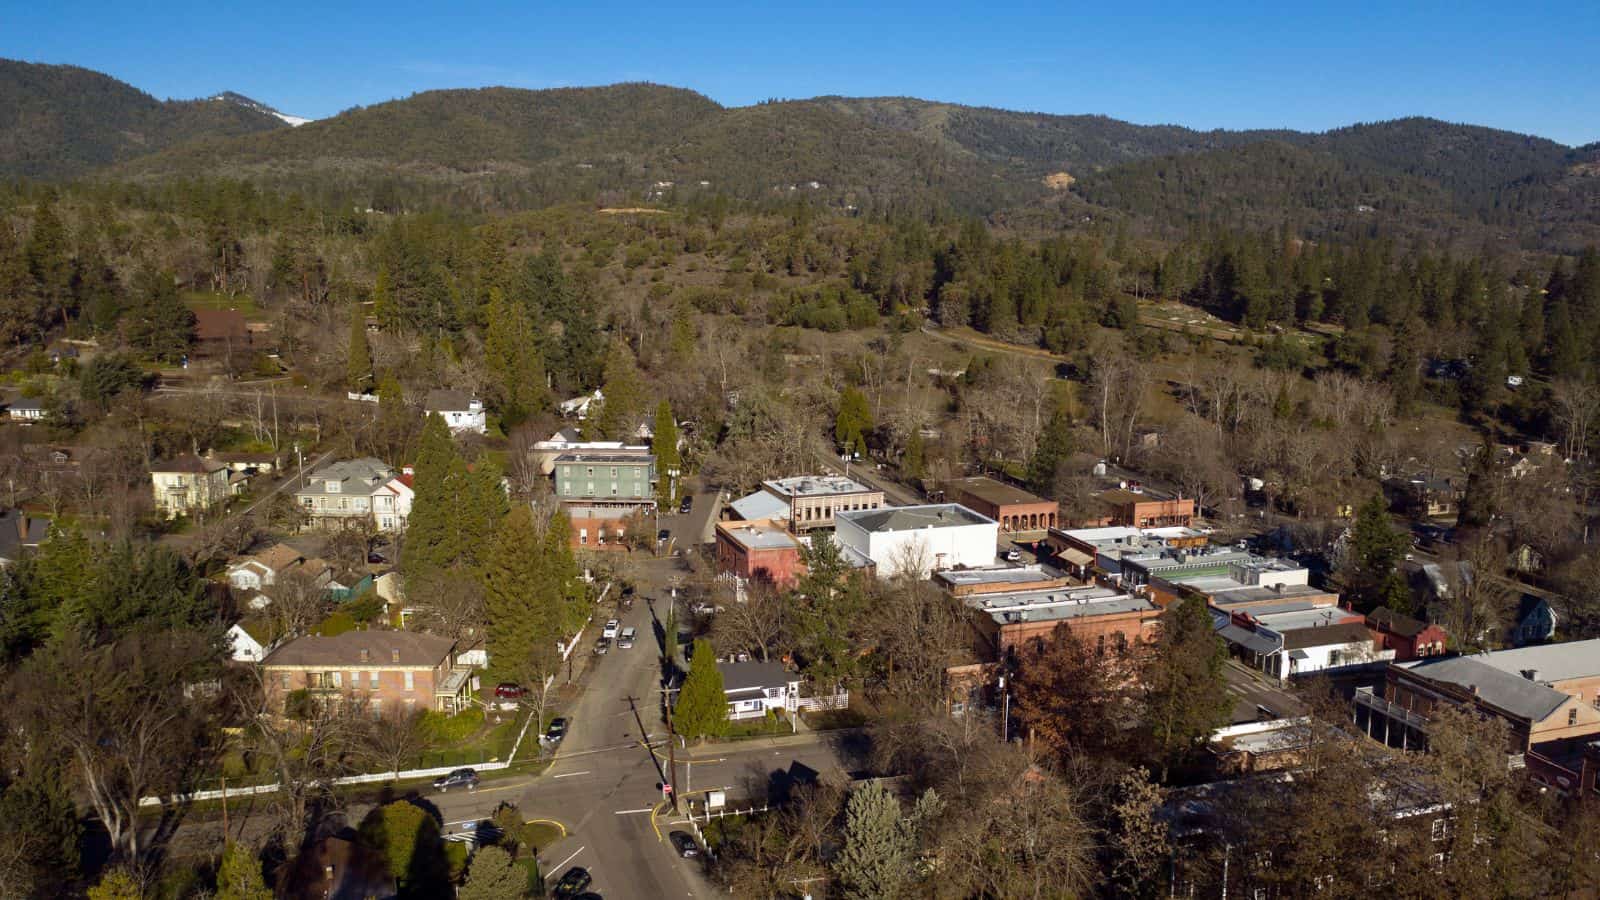 <p>With a population of just 2,898, Jacksonville is one of the most peaceful destinations in the country. Designated a National Historic District, the town was built on gold mines. Now, the town is the heart of Oregon’s wine region, with the Applegate Wine Trail boasting 18 vineyards.</p>